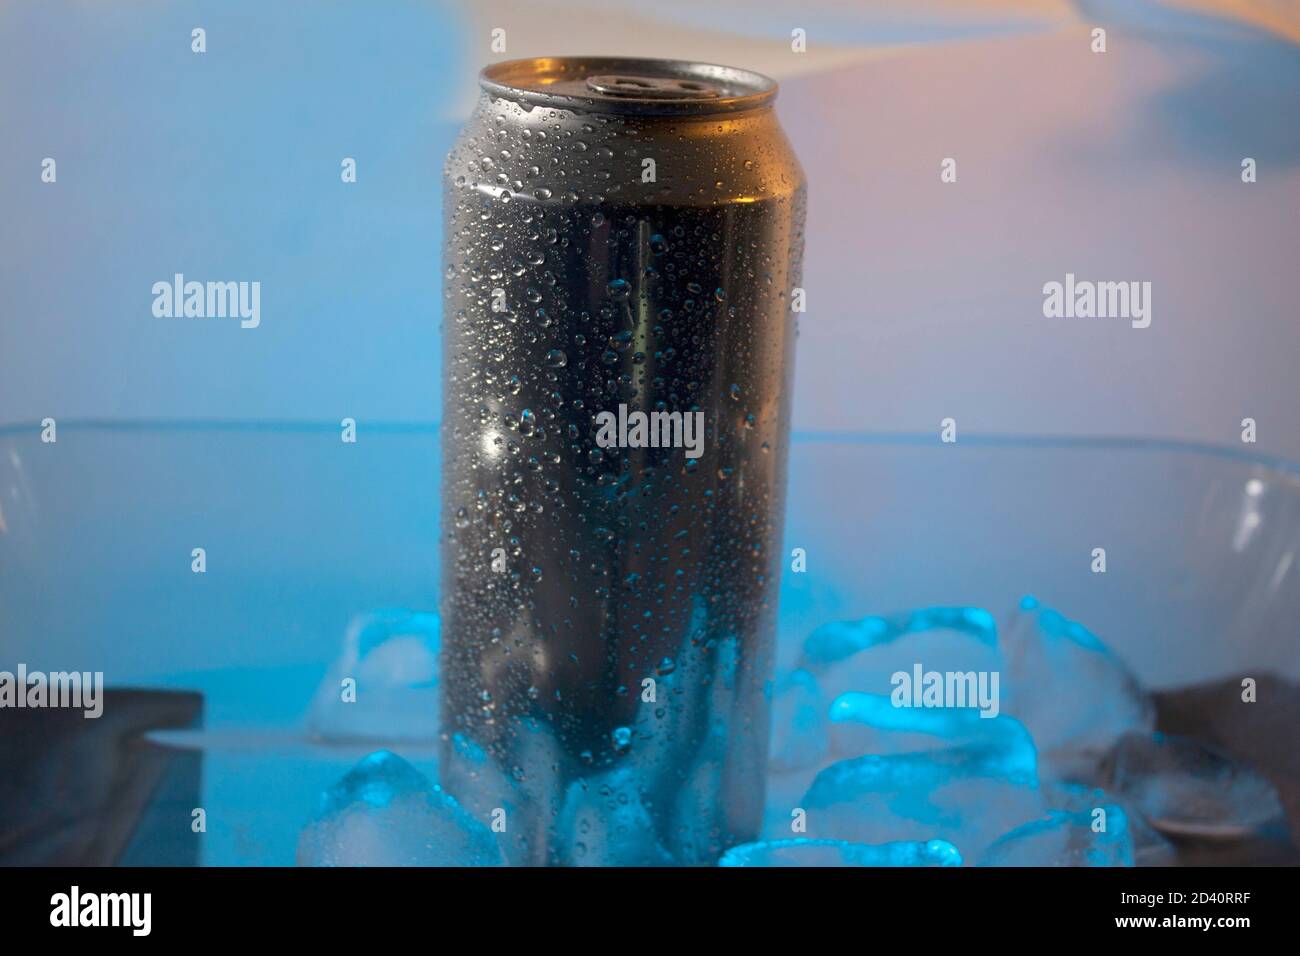 Silver can surrounded by icy droplets standing inside blue ice in Mexico with no people in the scene Stock Photo